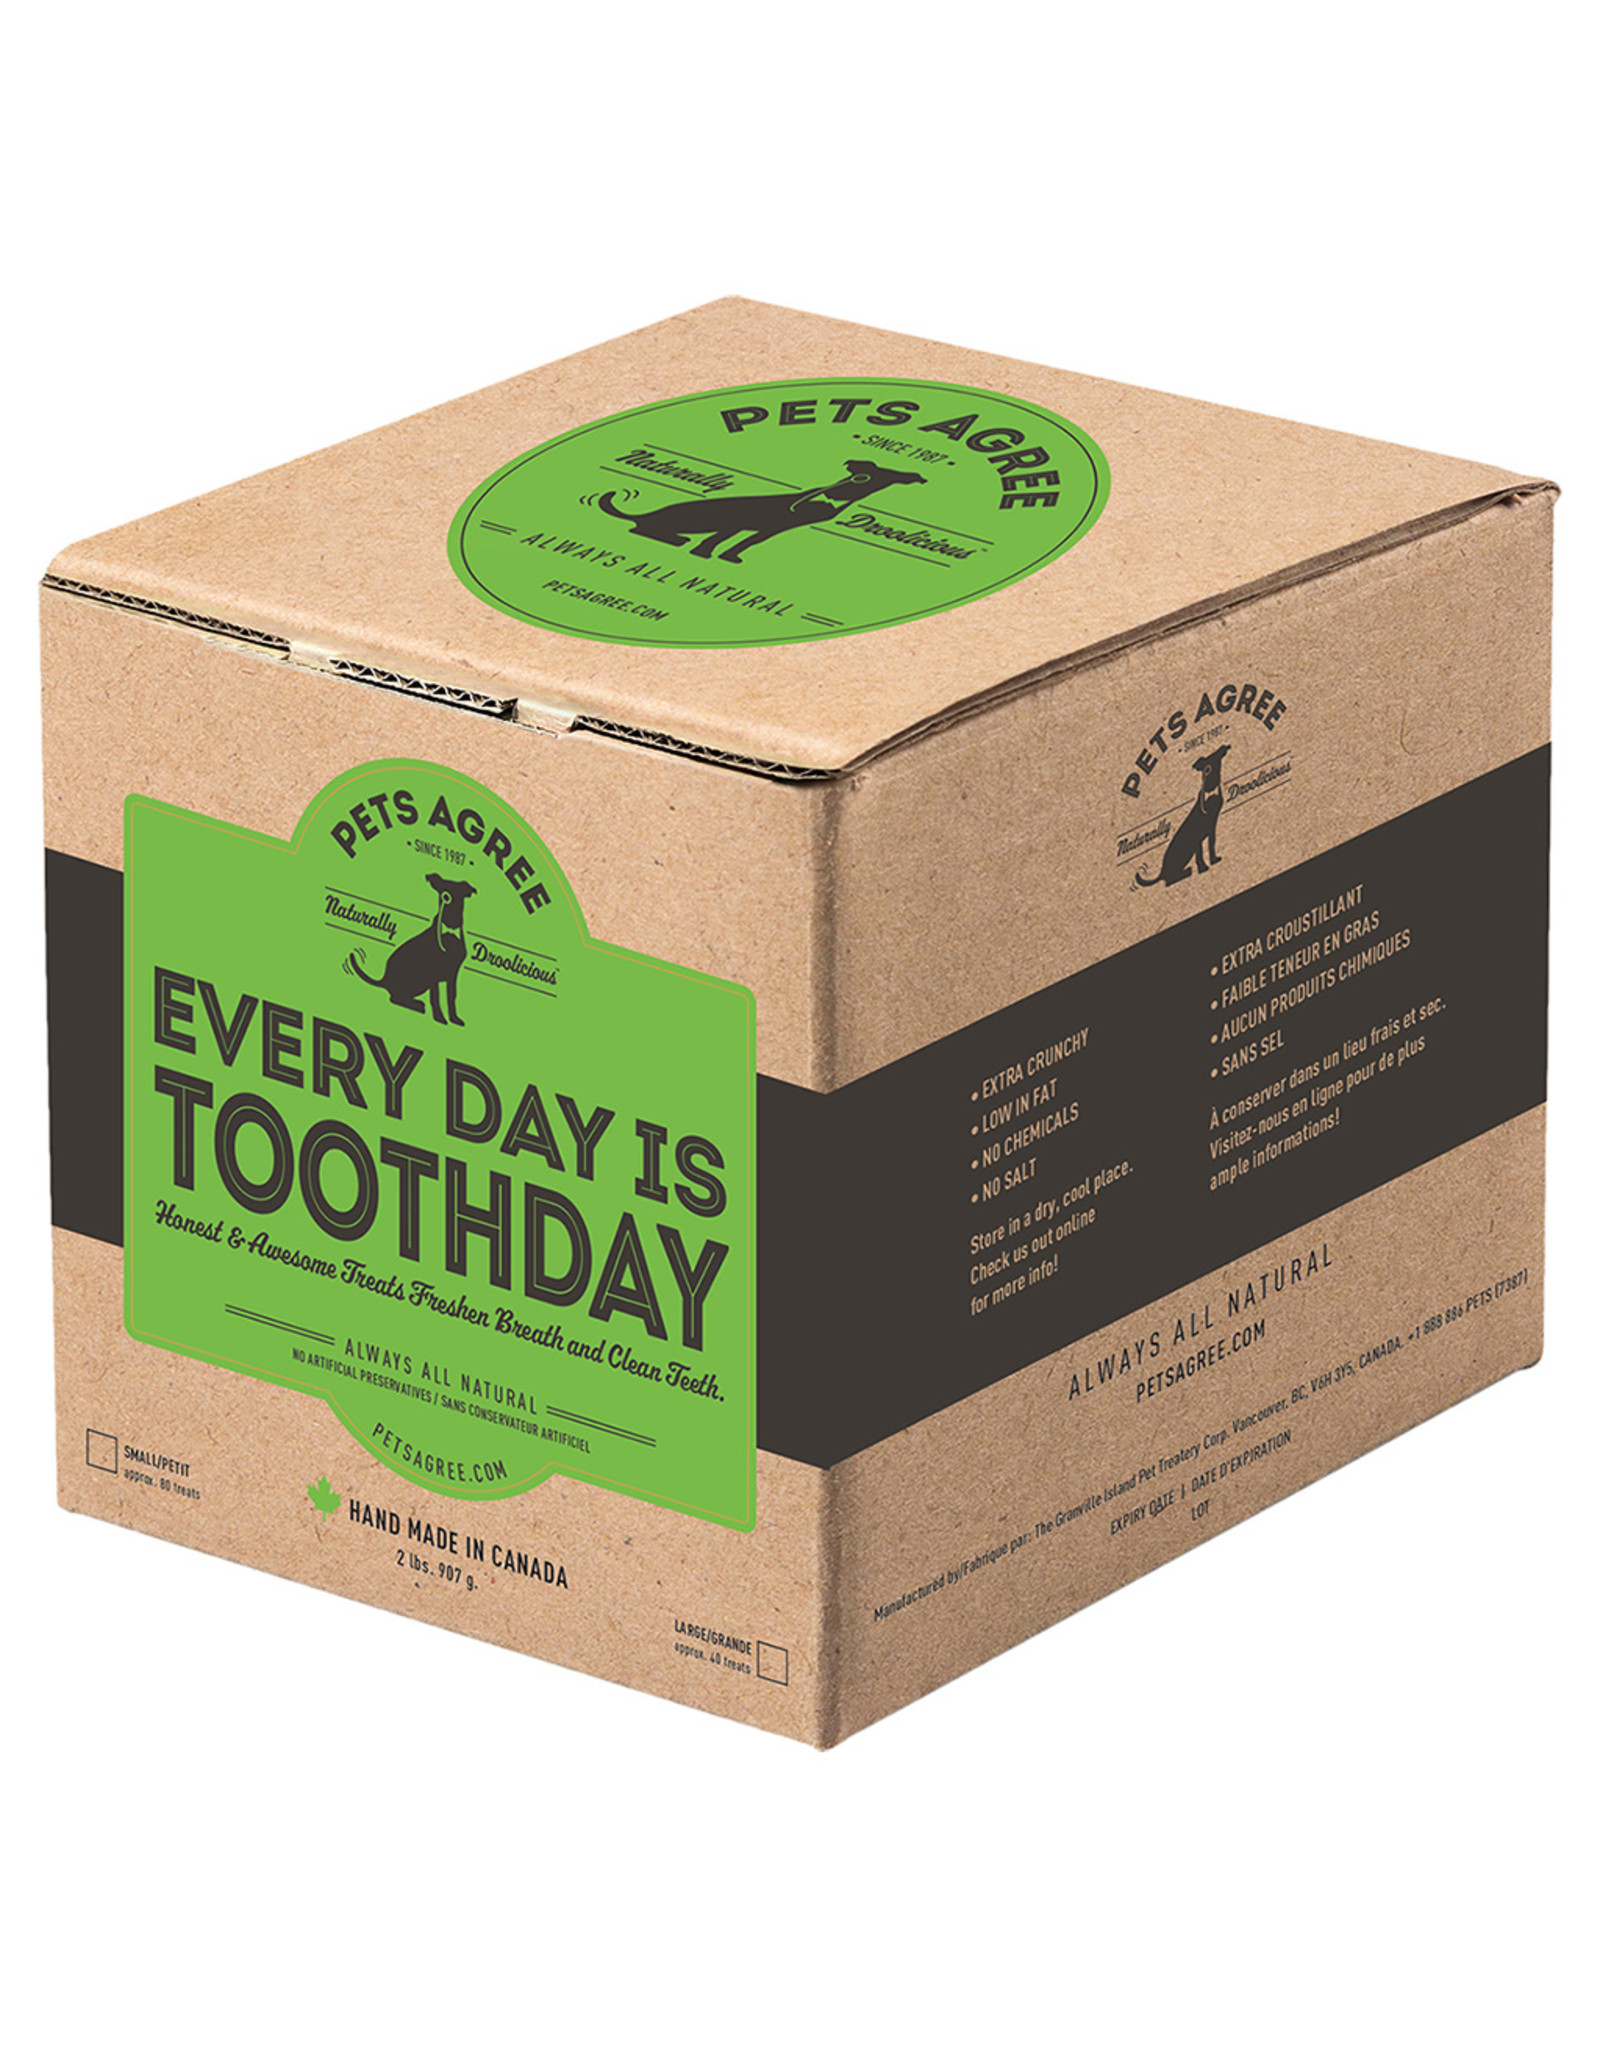 Pets Agree Everyday is Tooth Day 2LB